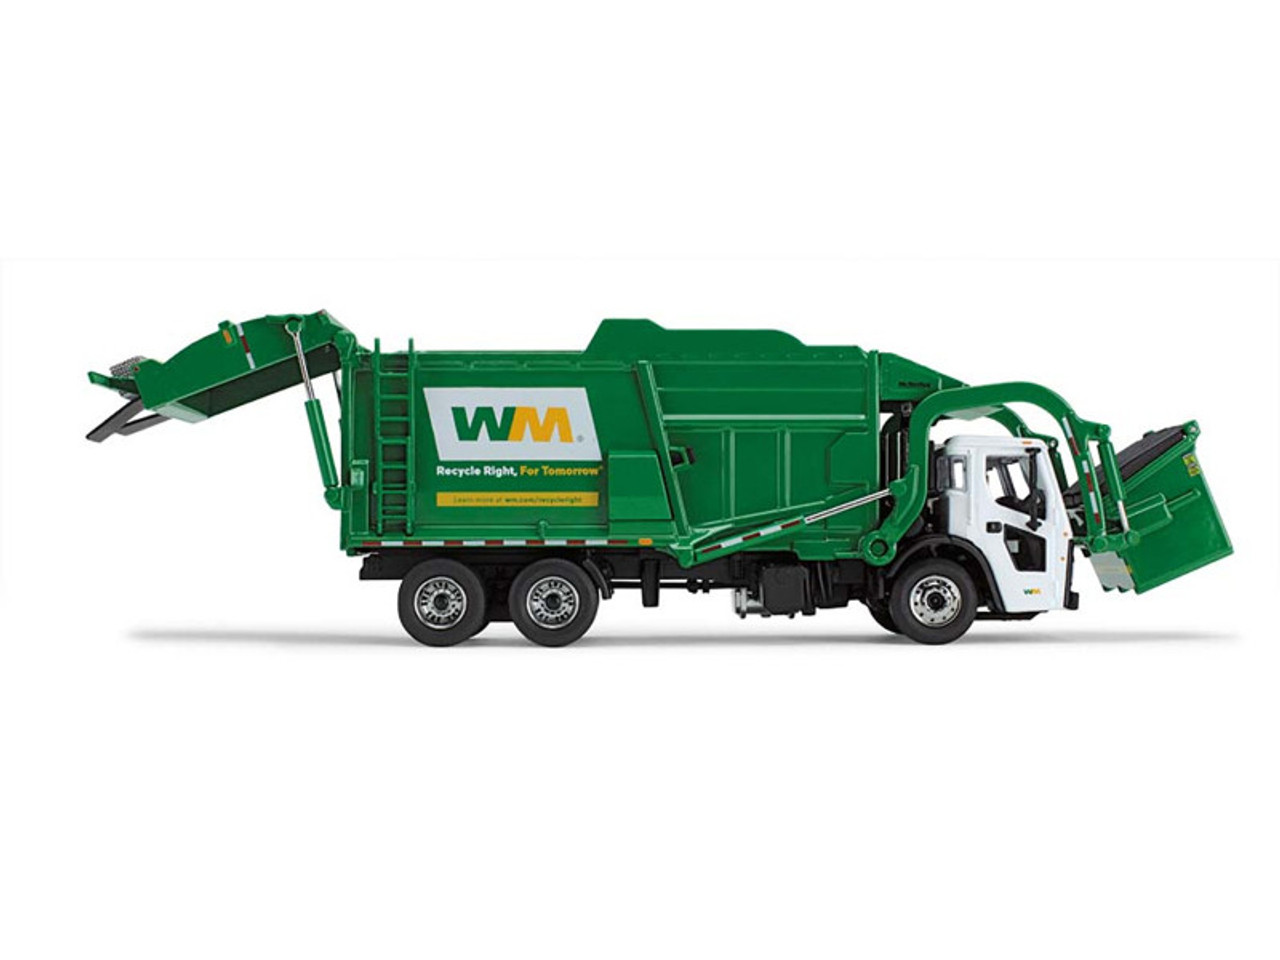 Mack LR Garbage Truck with McNeilus Meridian Front Load Refuse Body White and Green with Refuse Bin "Waste Management" 1/64 Diecast Model by First Gear